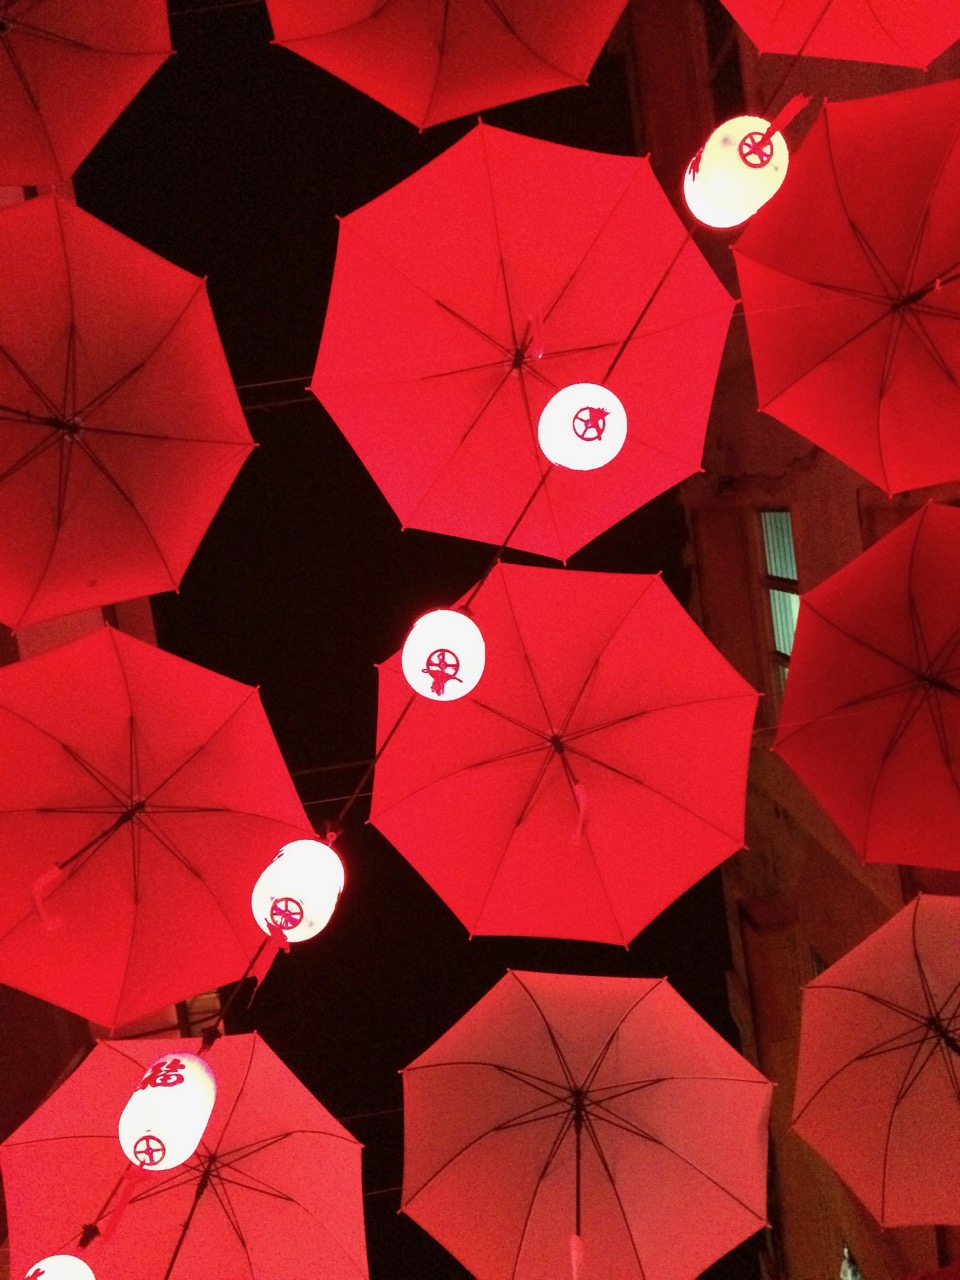 Chinese lanterns and red umbrellas